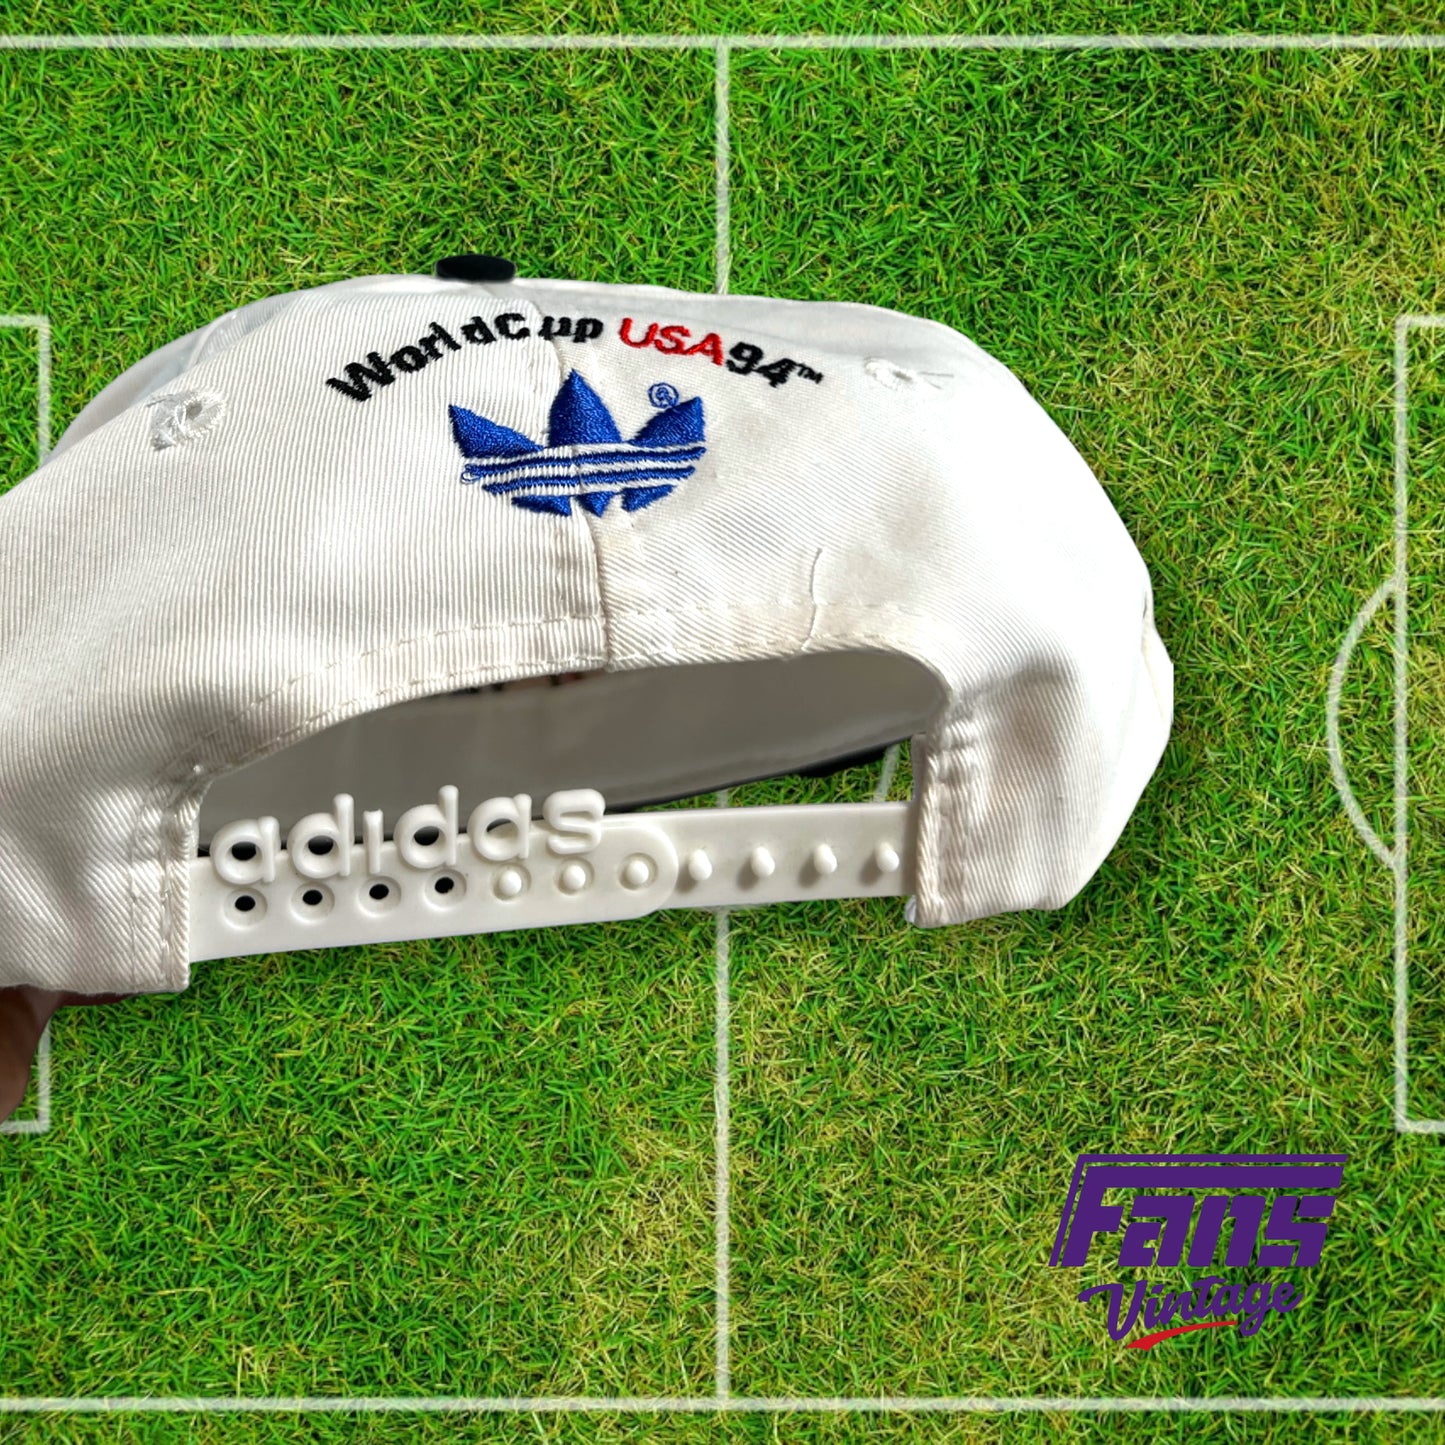 90s vintage Adidas World Cup snapback hat - New with tags!